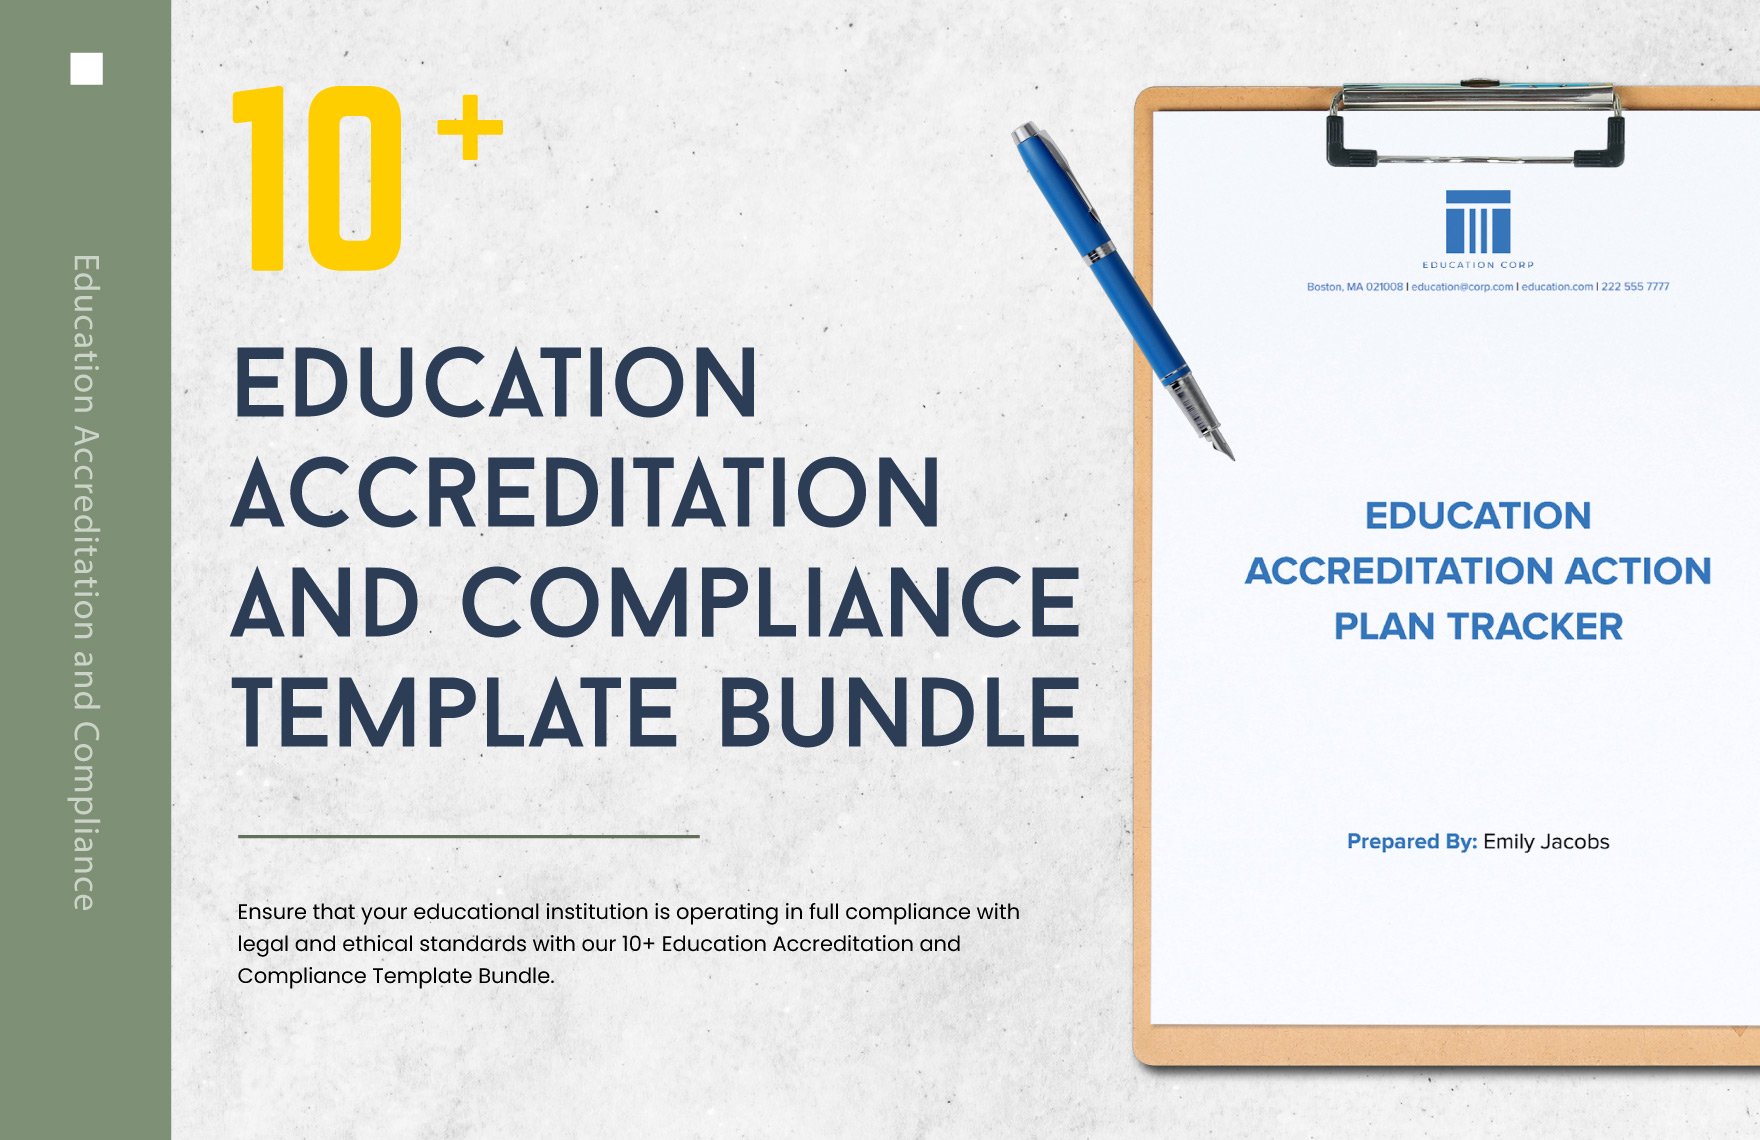 10+ Education Accreditation and Compliance Template Bundle in Word, Google Docs, PDF